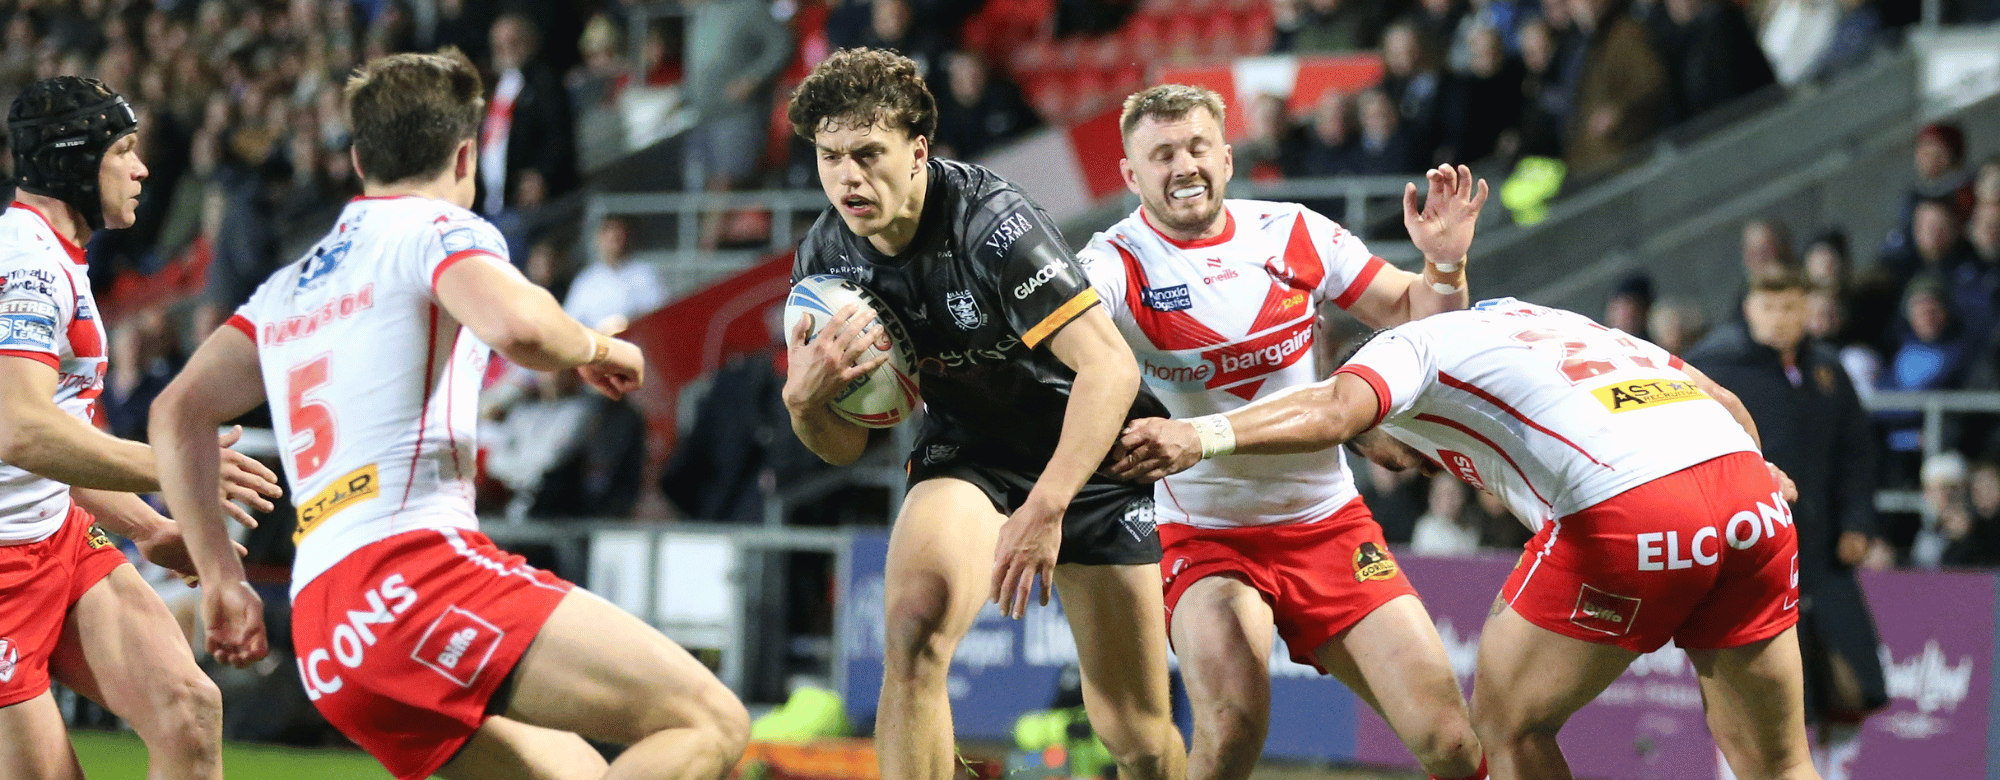 Match Report: St Helens 58-0 Hull FC